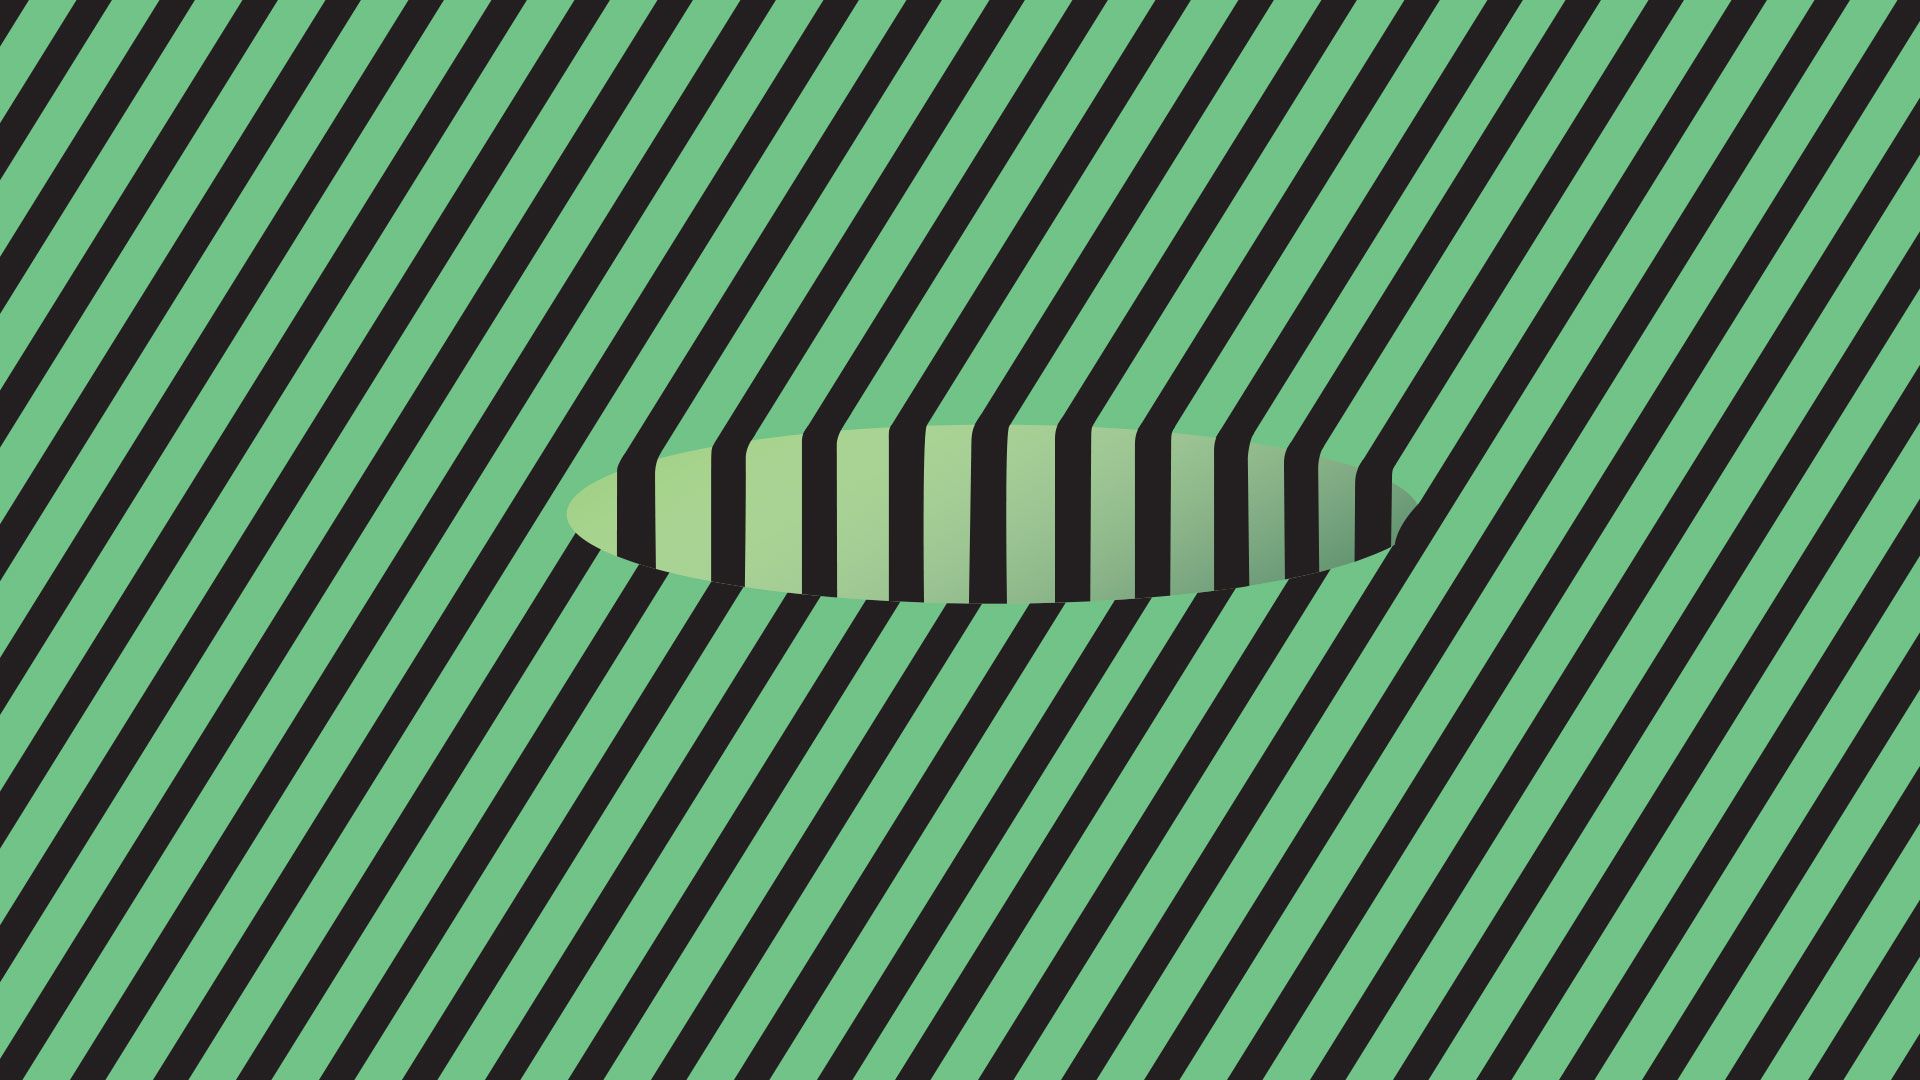 Illustration of hole floating in space shown through alternating green and black lines in a style of optical illusion.